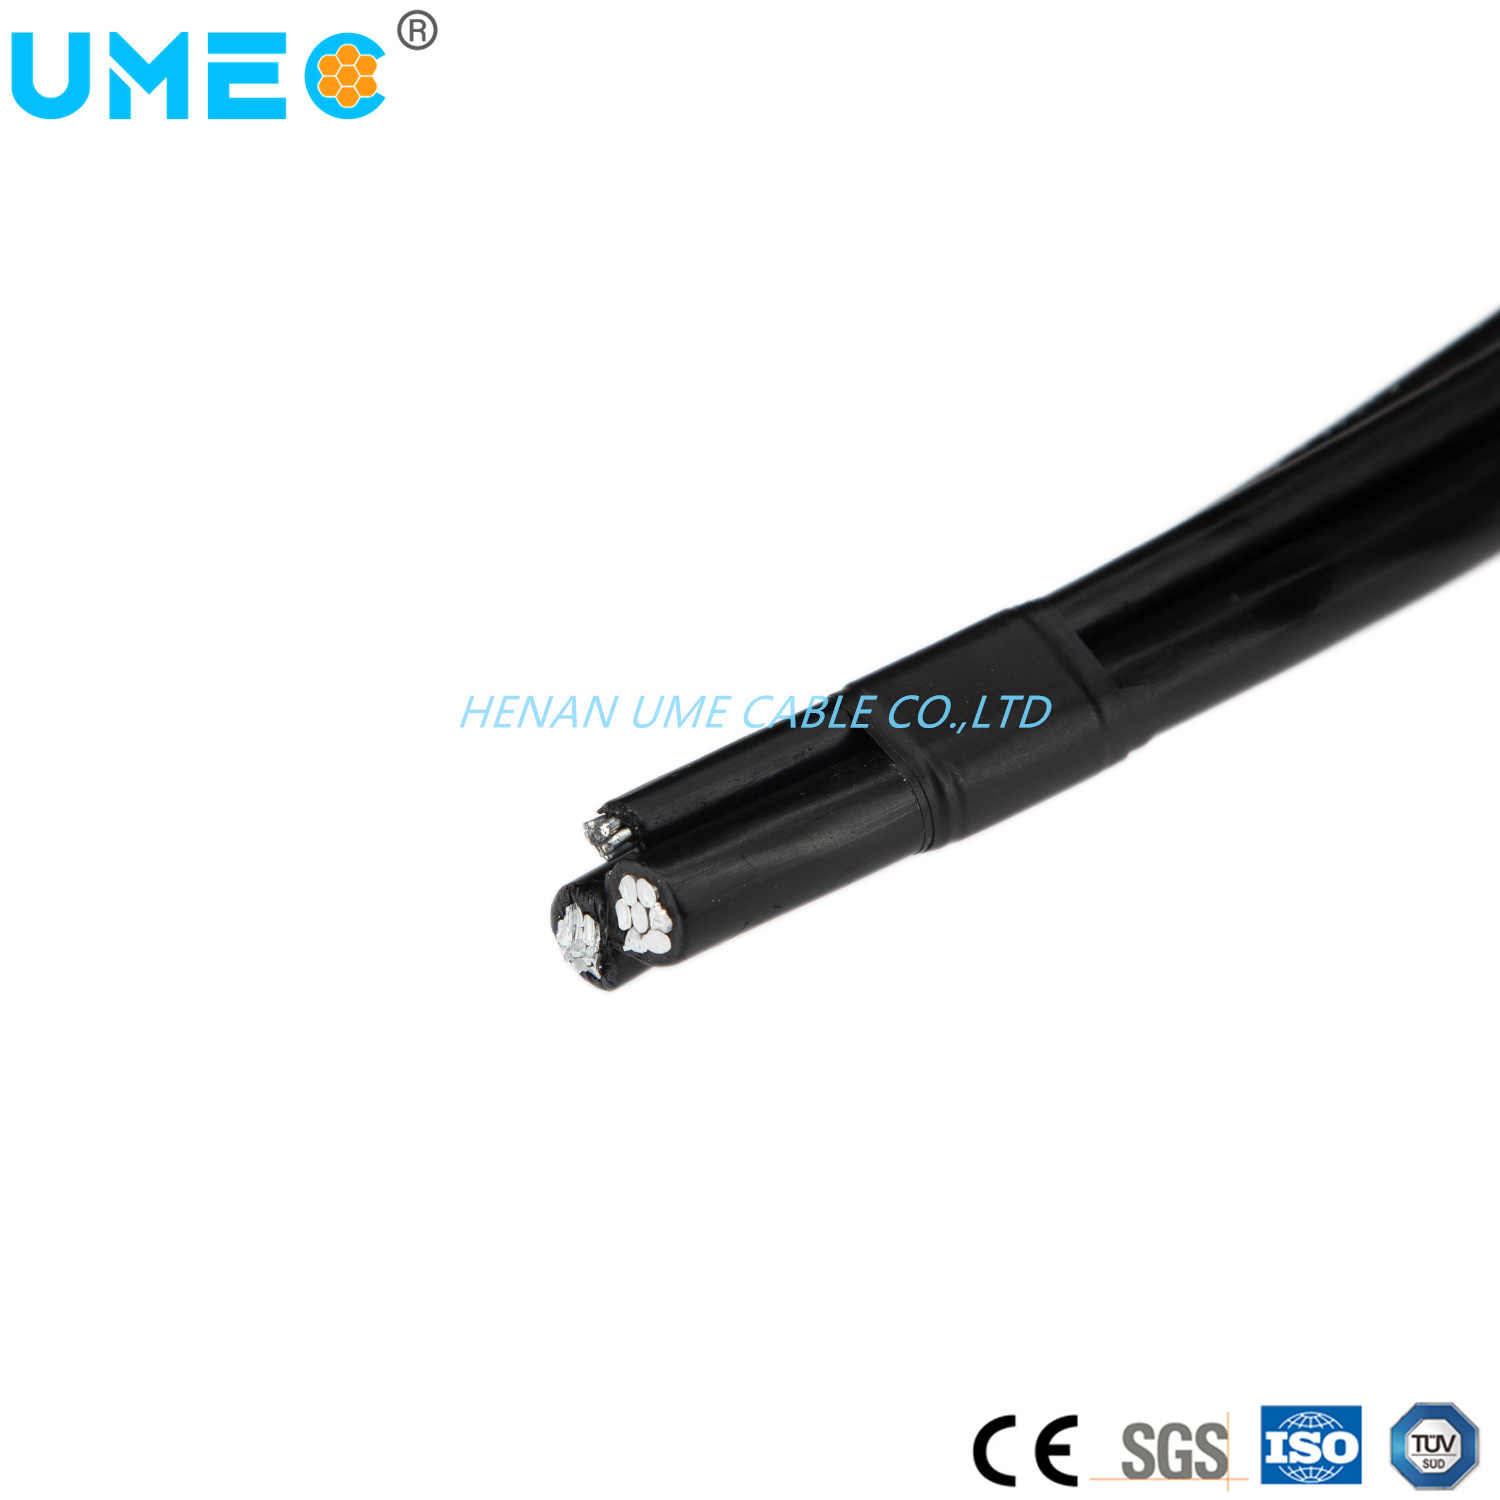 Aluminum Conductor LV ABC Cable XLPE/PE/PVC Insulated Overhead Triplex Service Drop Cable 4X70mm2 50mm2